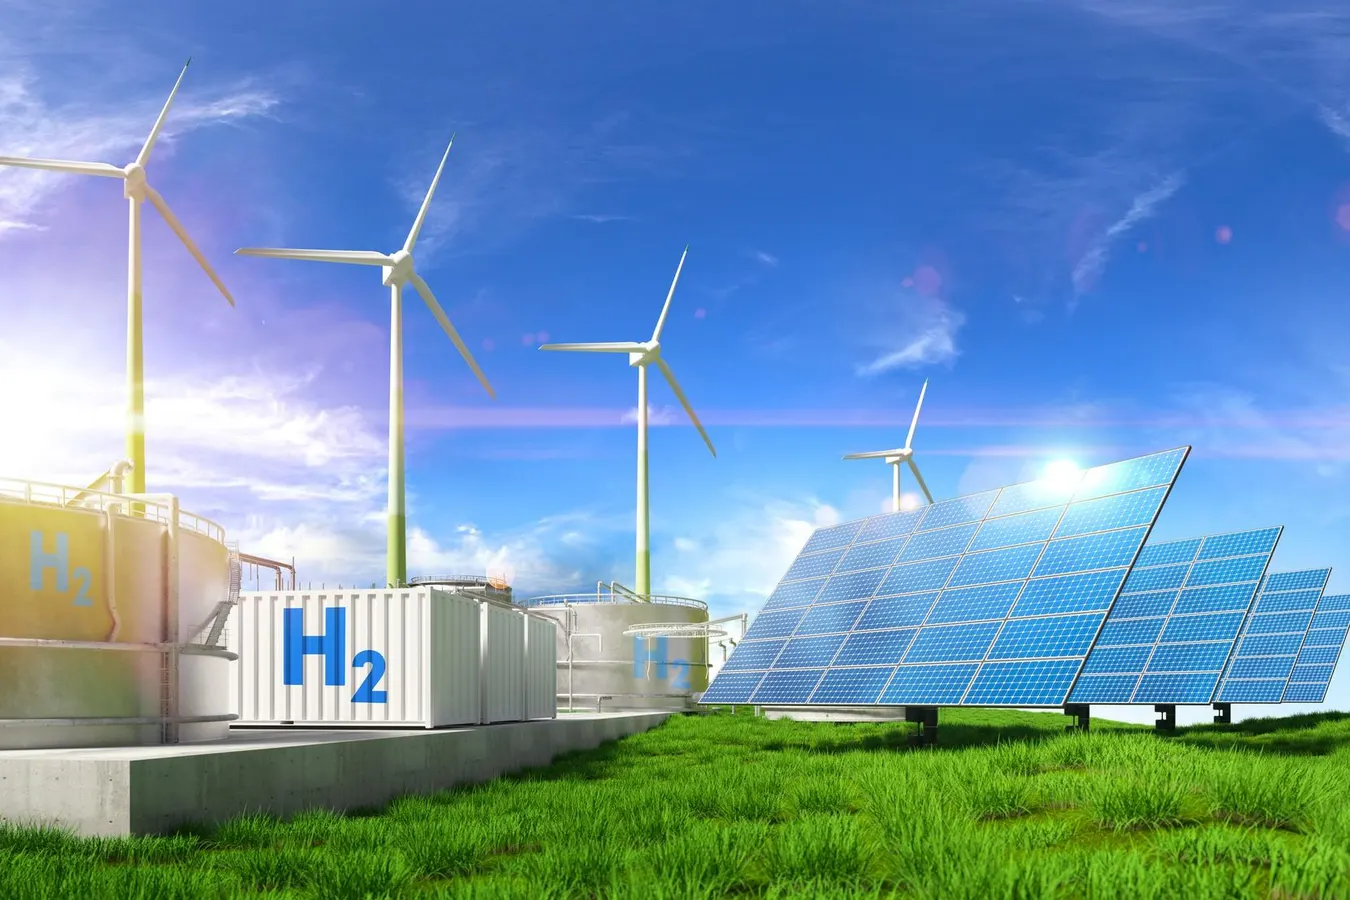 Morocco to sign first green hydrogen contracts in Q4